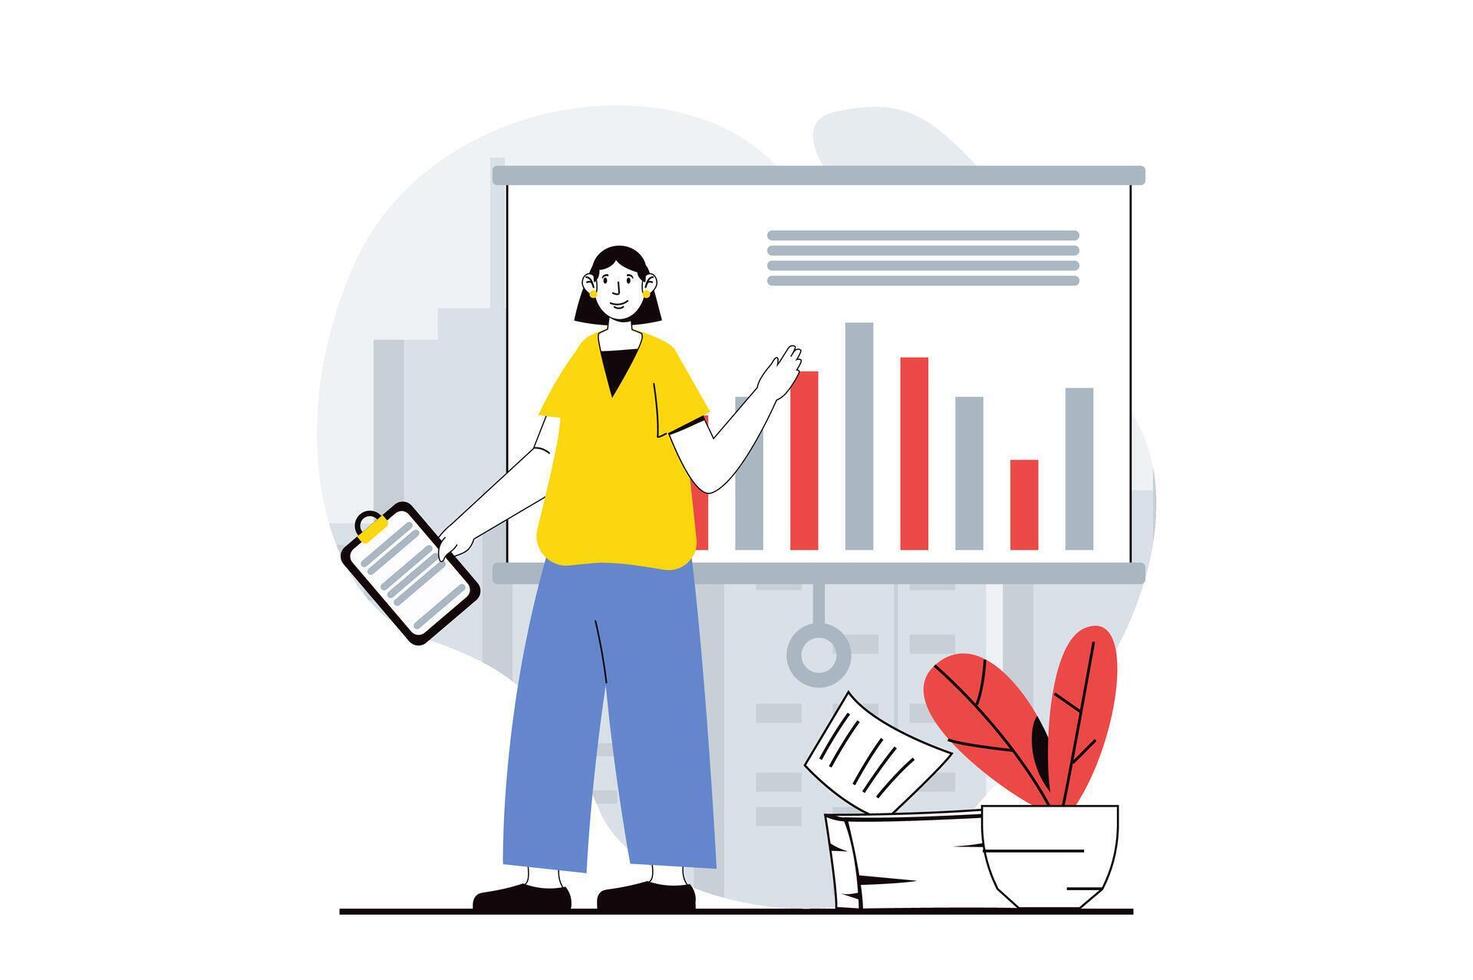 Data analysis concept with people scene in flat design for web. Woman working with charts and making presentation of earnings data. Vector illustration for social media banner, marketing material.